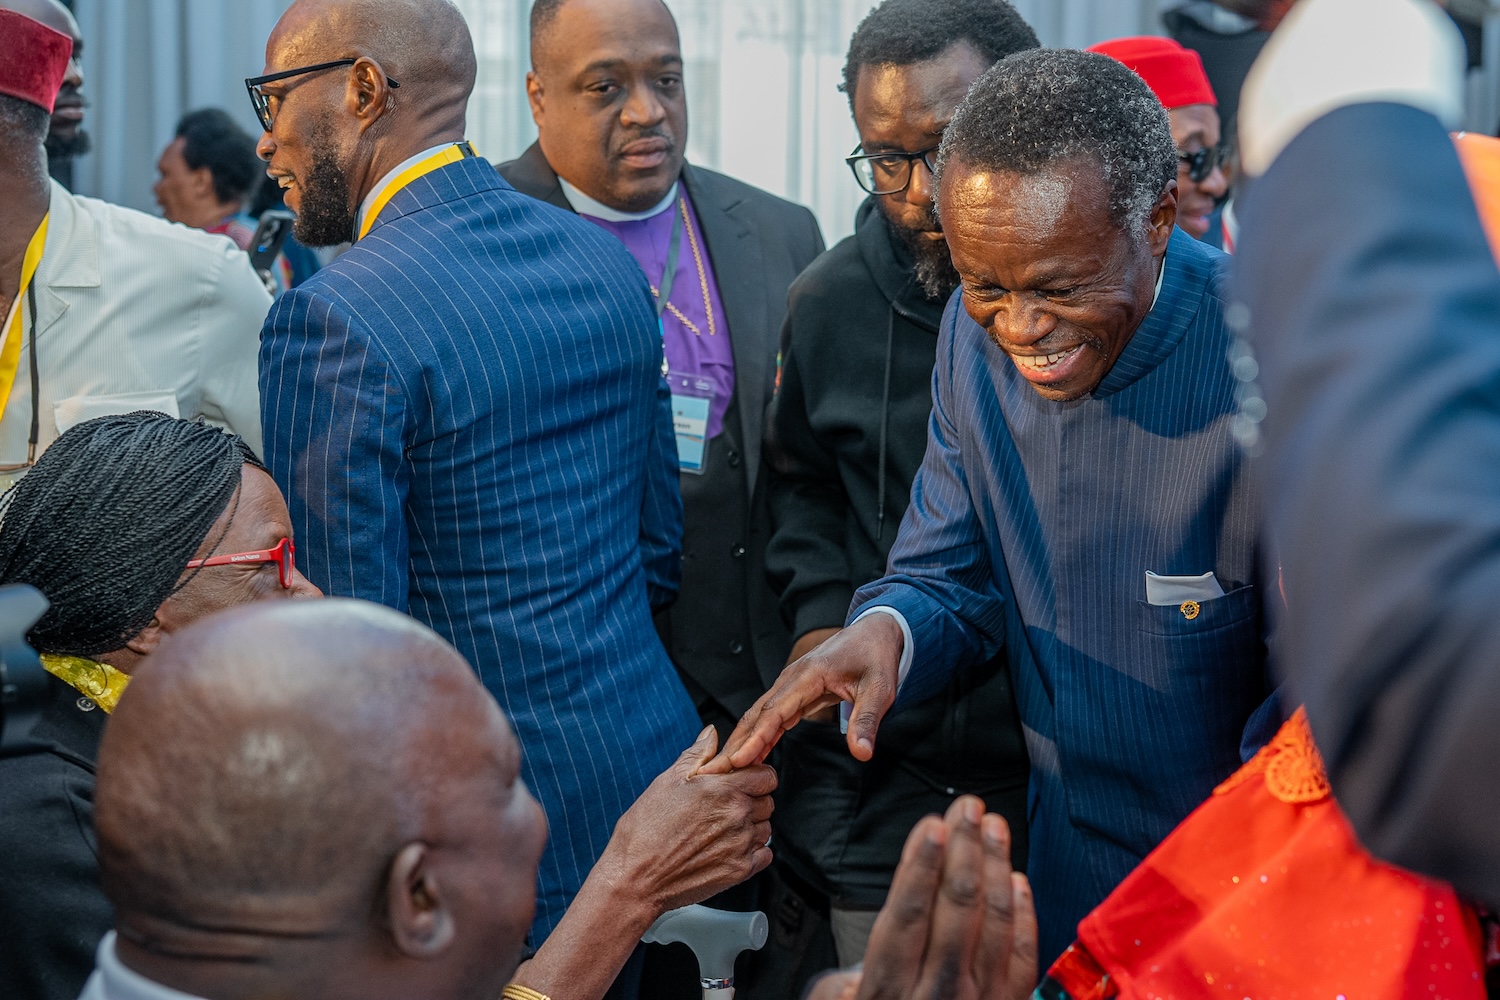 A group of well-dressed individuals interacts at an event. One man smiles and shakes another person's hand while others converse in the background, creating a warm atmosphere reminiscent of the Ubuntu Track at GPLC Africa 2024.